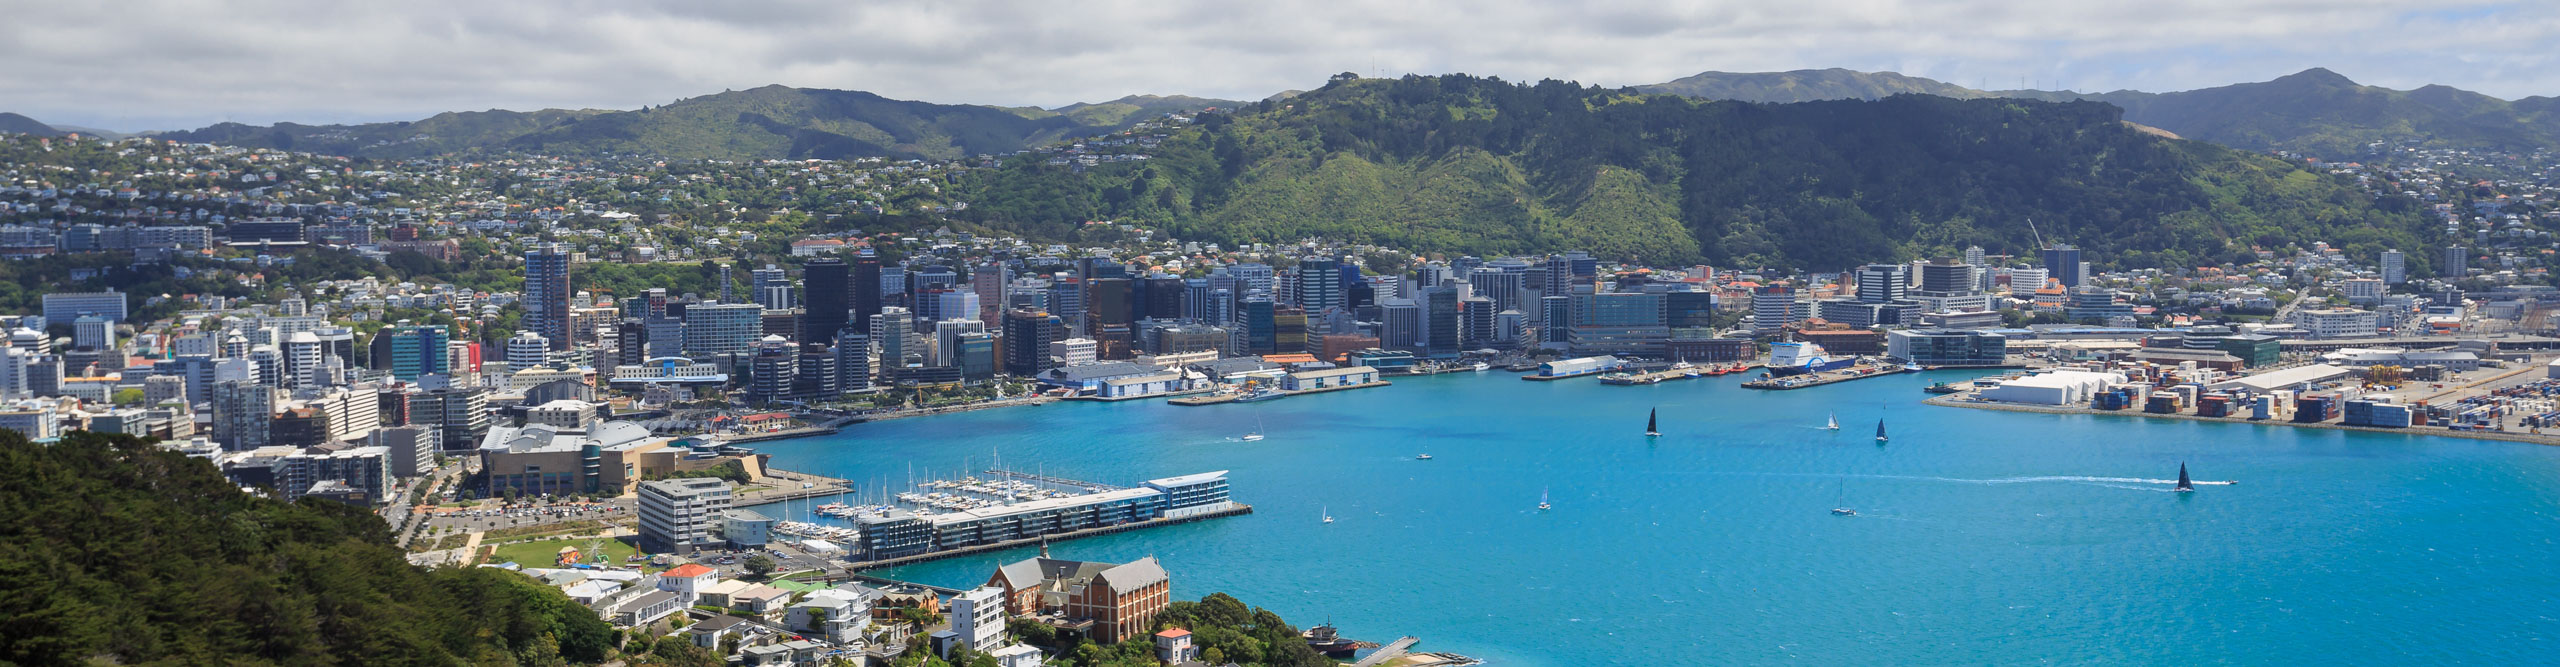 Wellington City harbor and downtown on.a cloudy day, with the water a bright turquoise blue